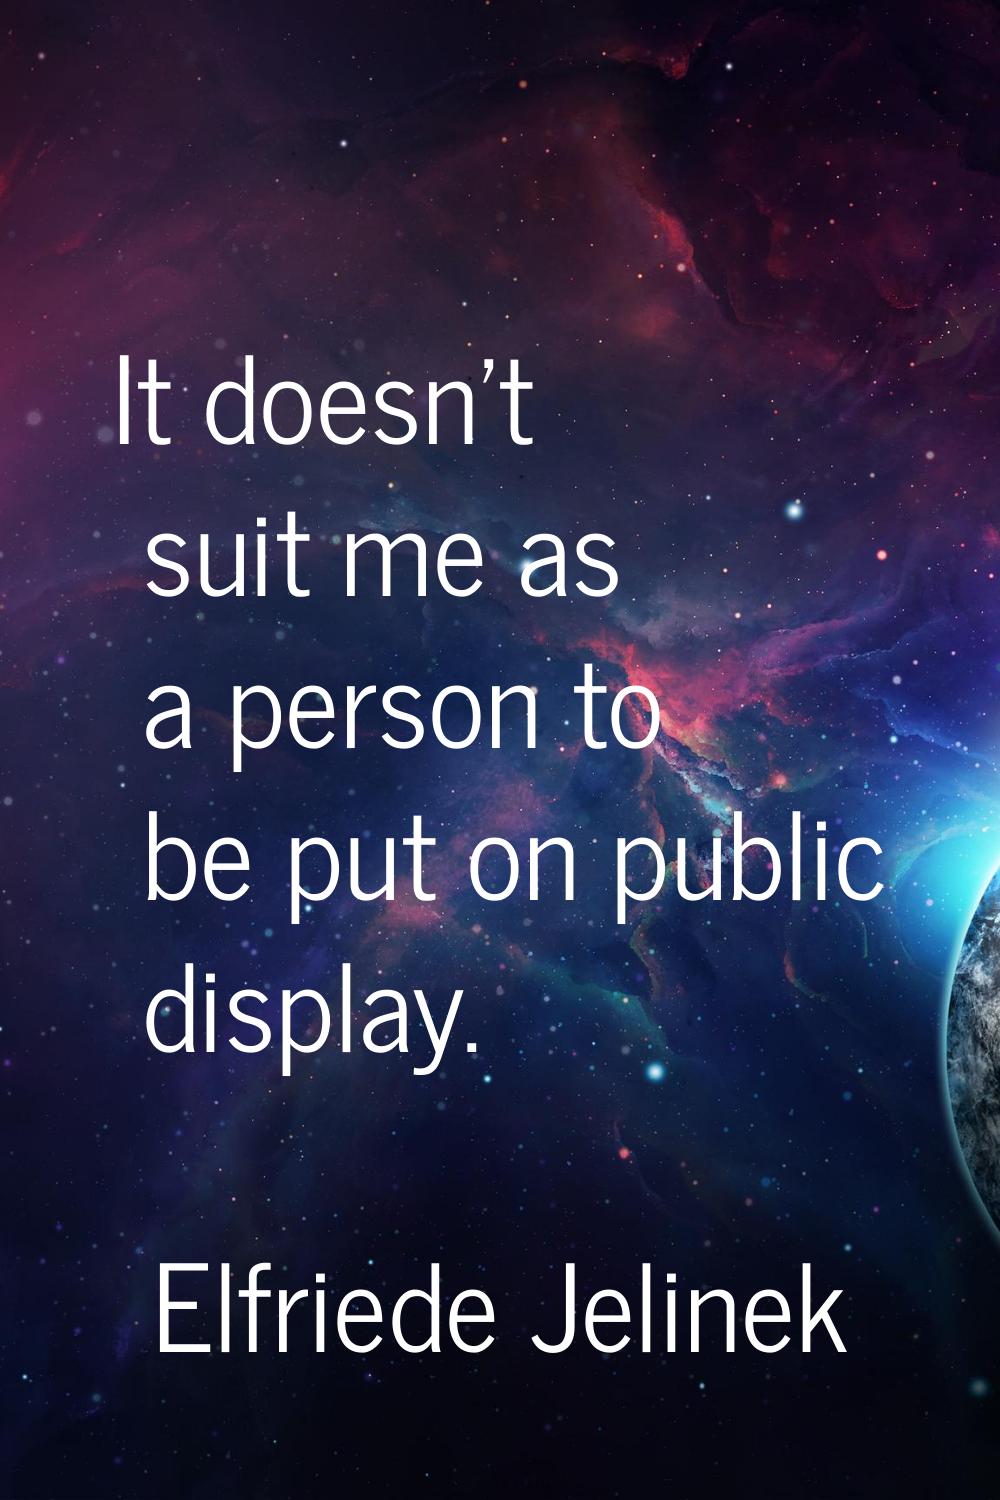 It doesn't suit me as a person to be put on public display.